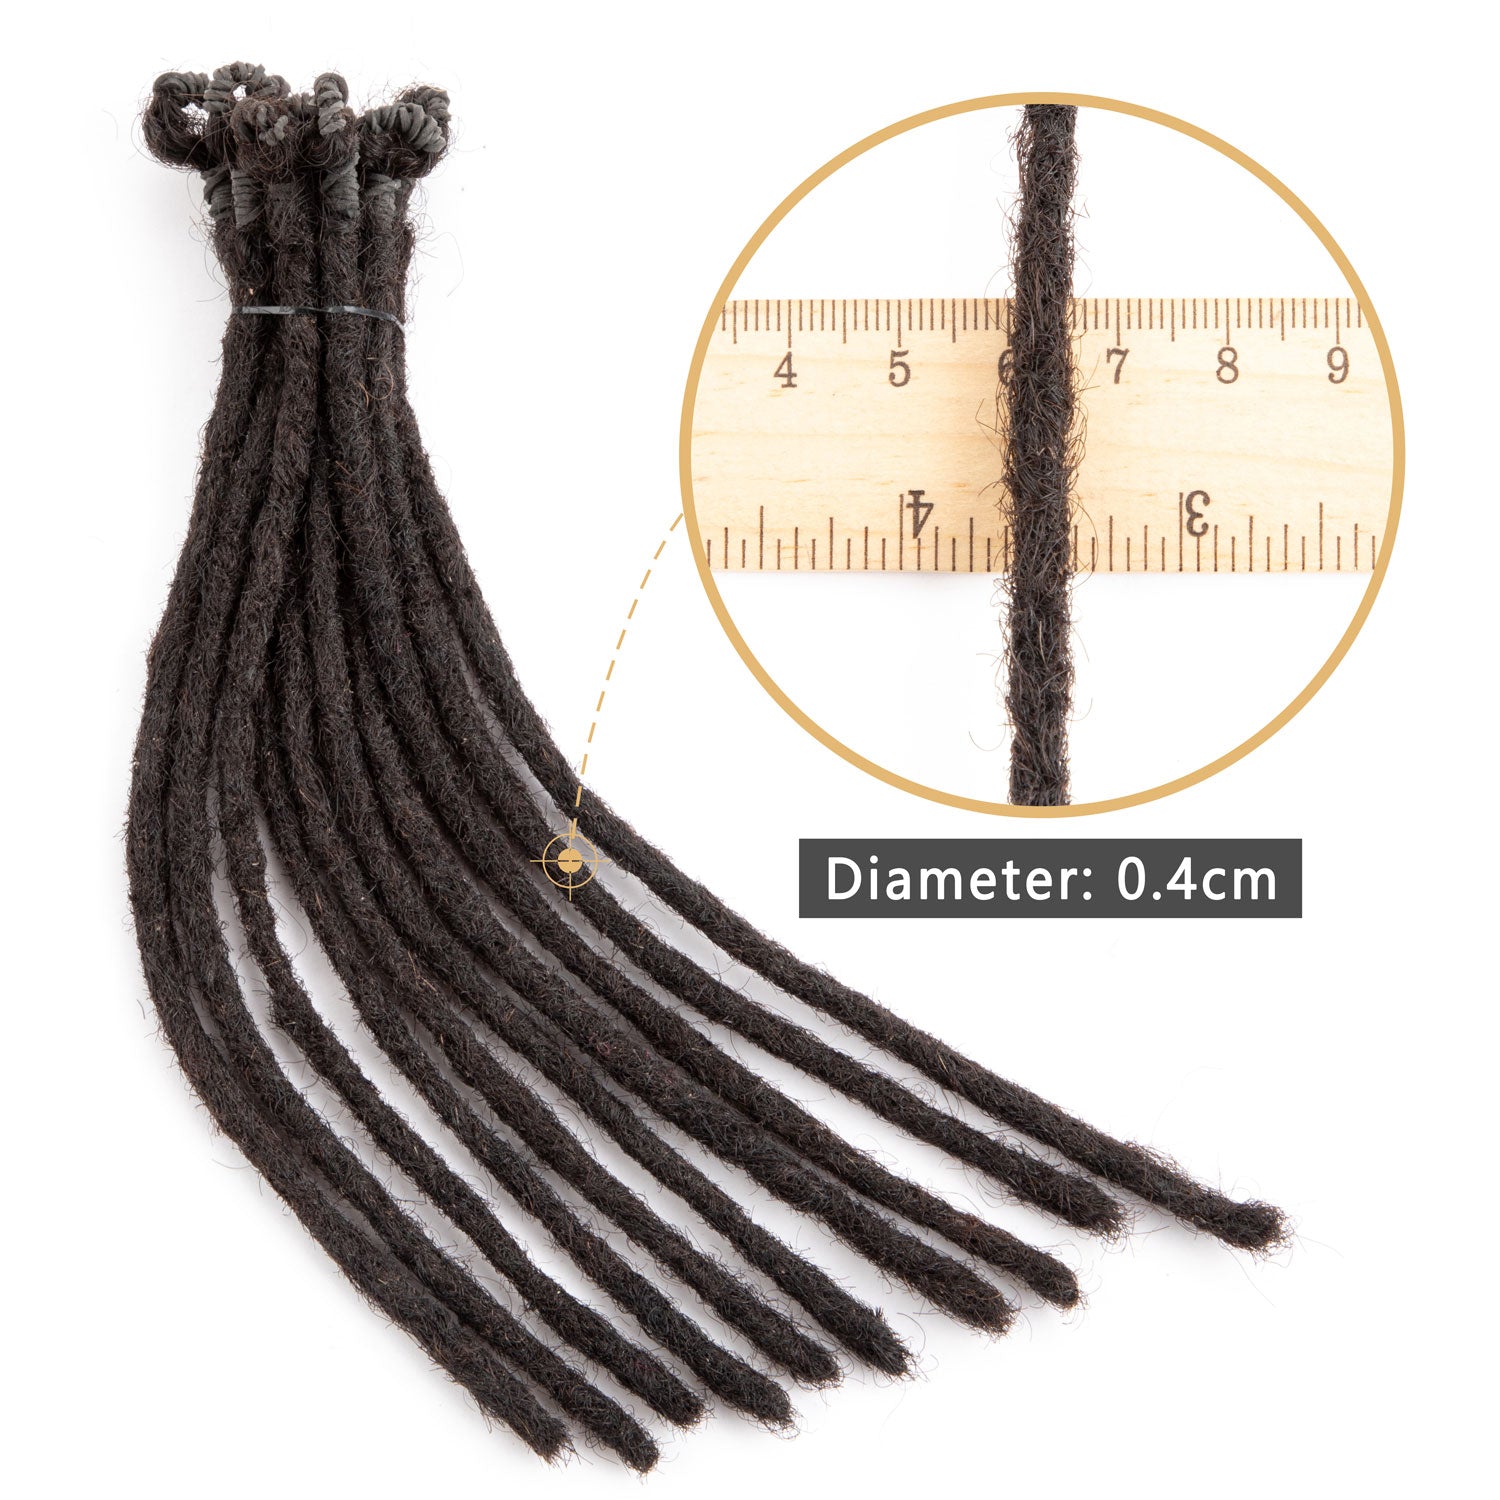 Pre-looped Top Dreadlocks Extensions Human Hair Permanent Dreads for Retwist Natural Color 0.4cm Thickness  (6-18 Inch)